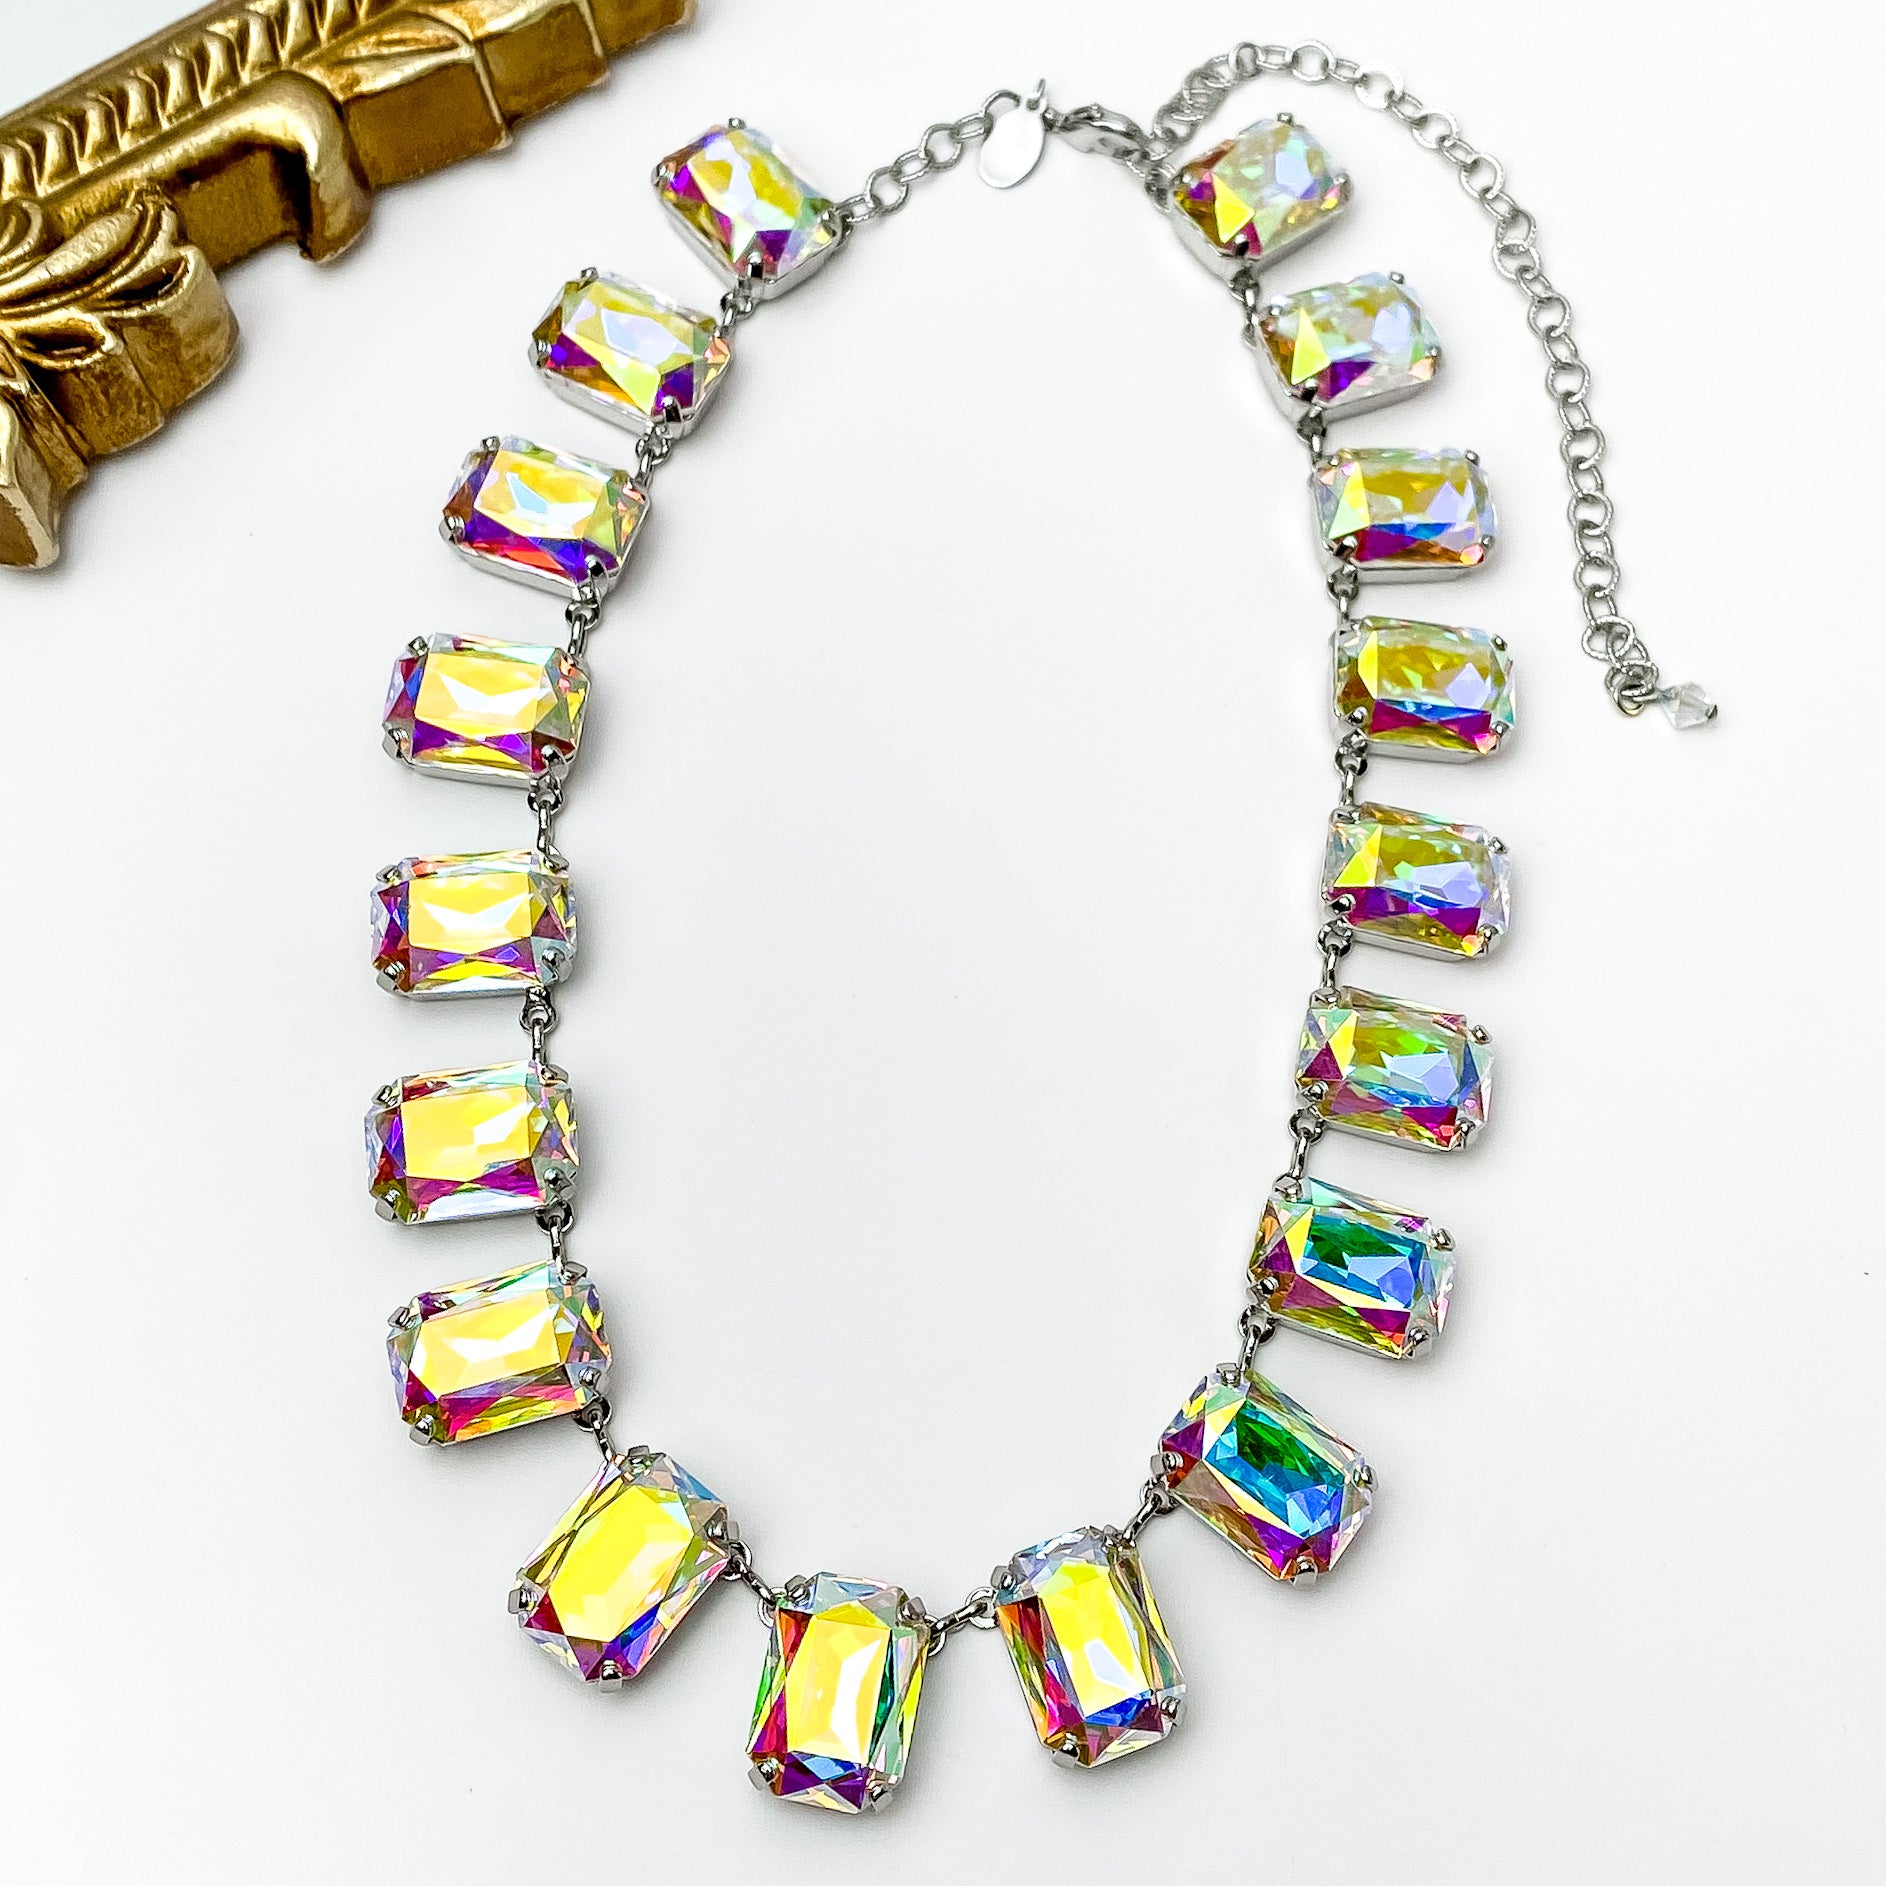 Sorrelli | Julianna Emerald Crystal Statement Necklace in Palladium Silver Tone and Aurora Borealis - Giddy Up Glamour Boutique